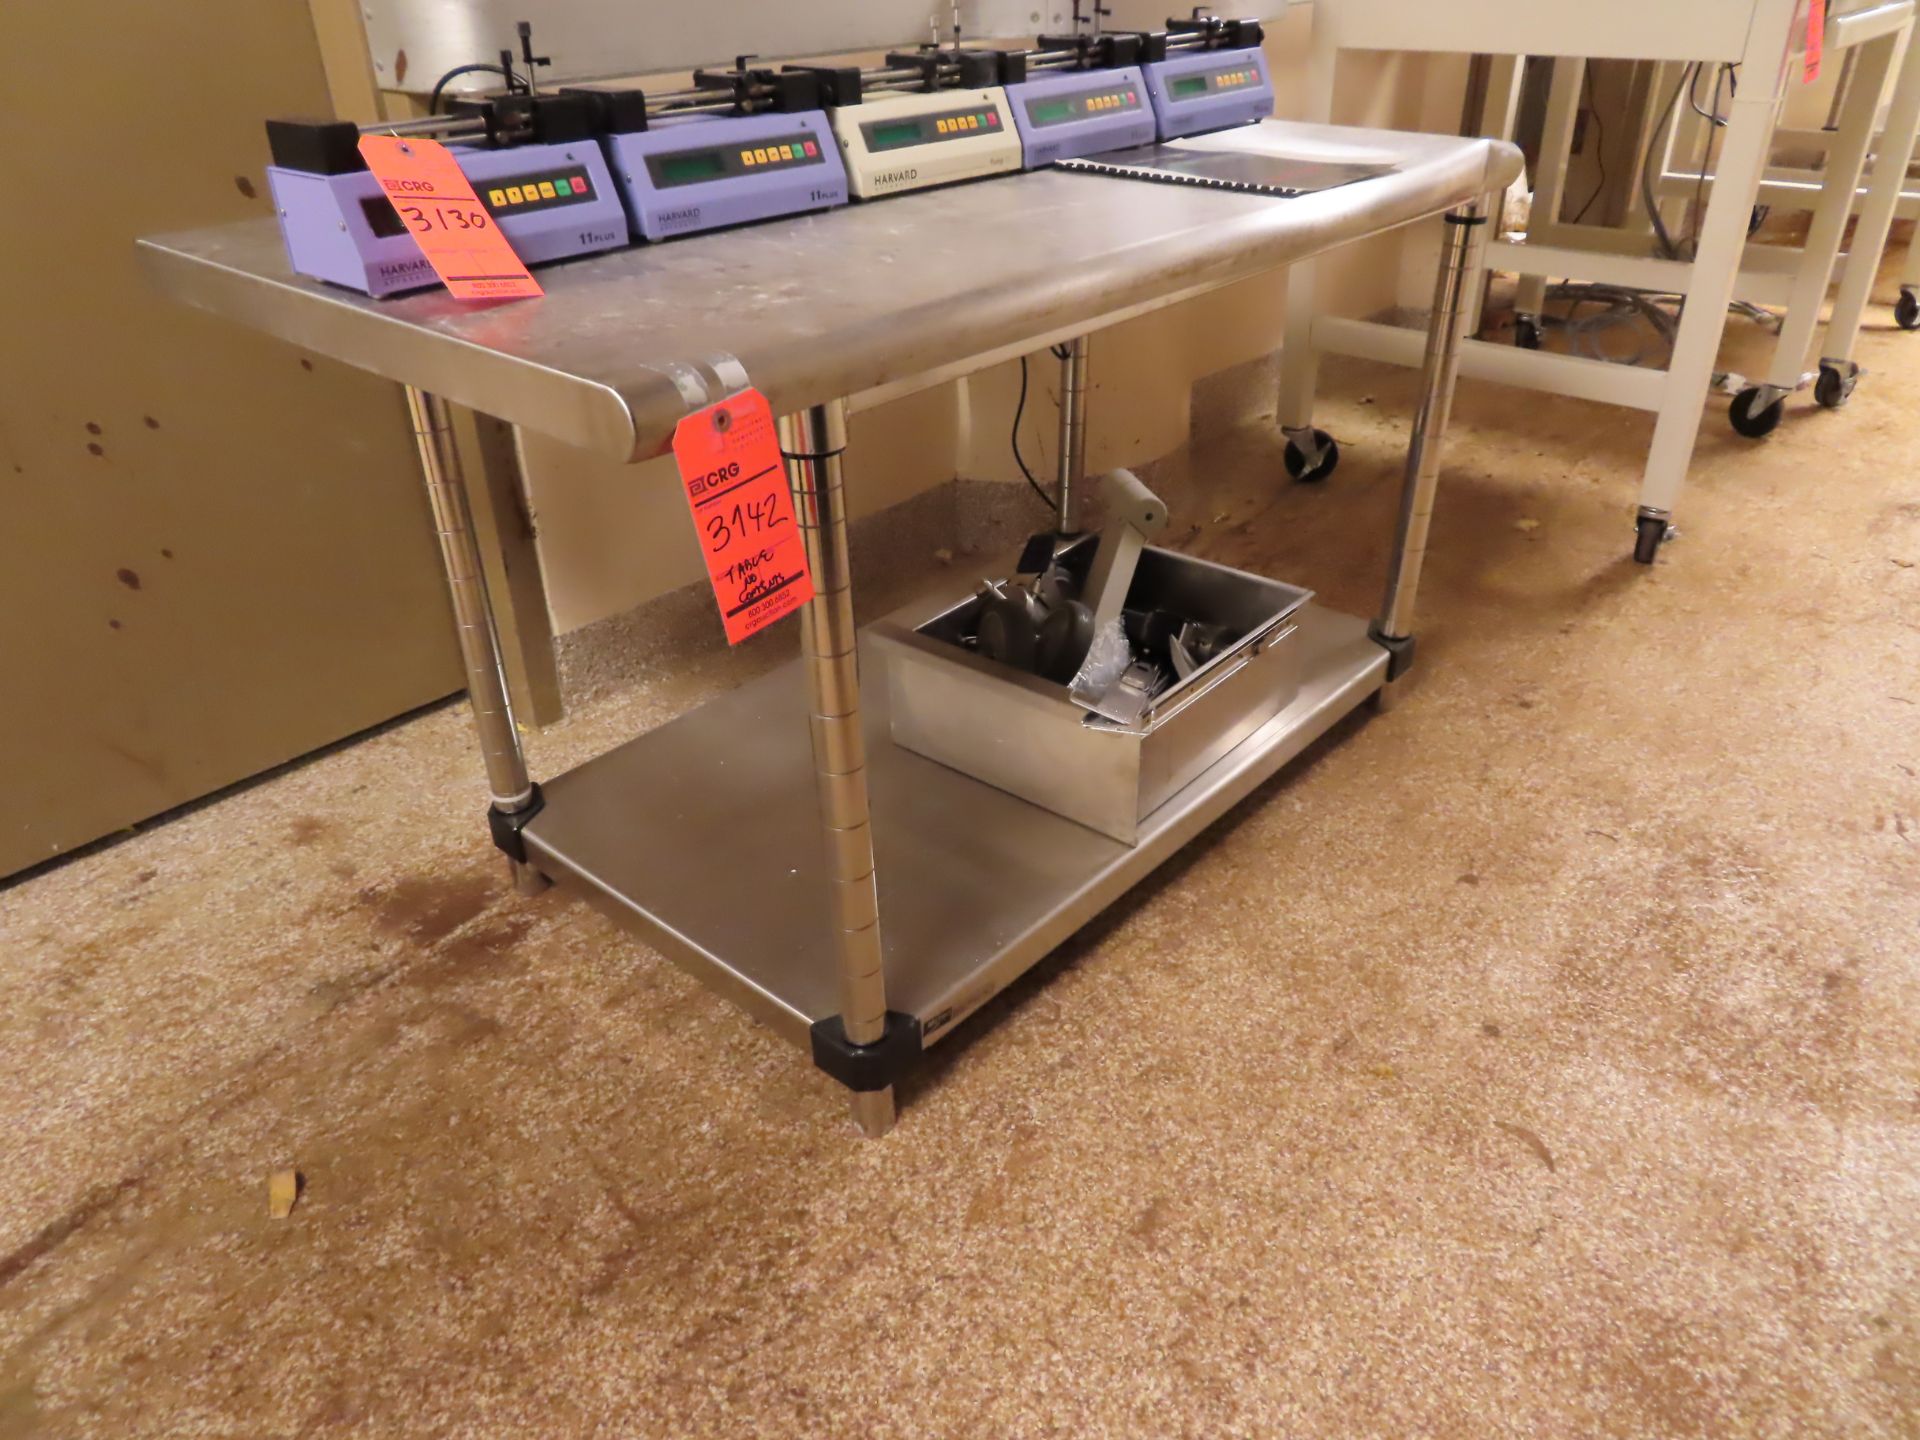 Lot of (6) ass't lab tables - (4) 36" x 30" with composite top on caster, (1) 38" x 28" formica